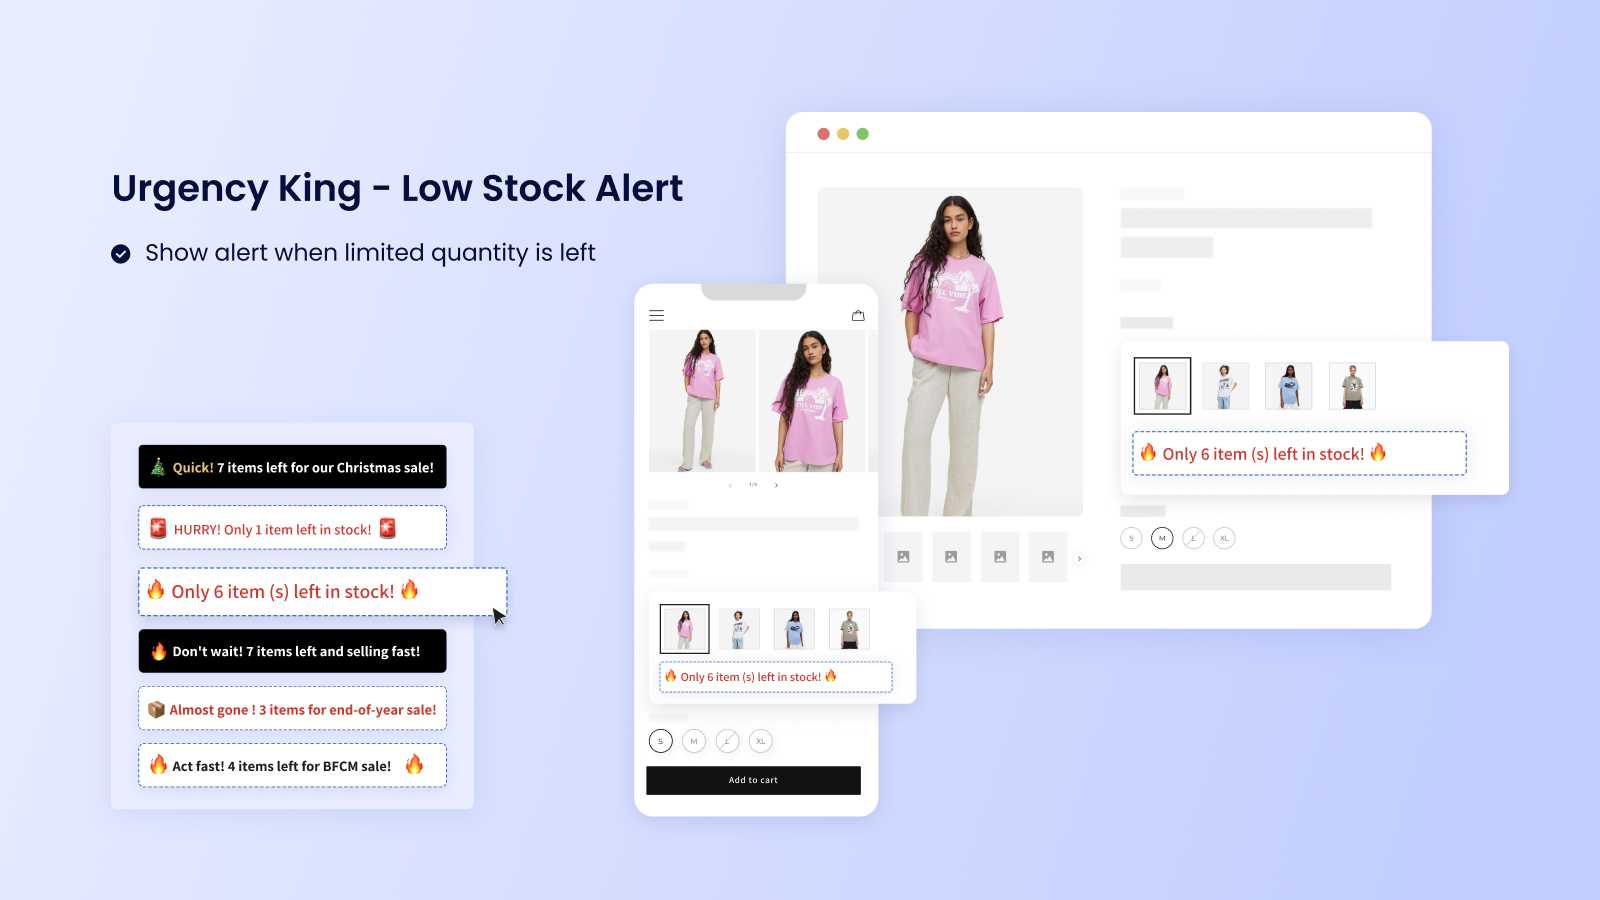 Urgency King - Low Stock Alert, boost sales and conversions